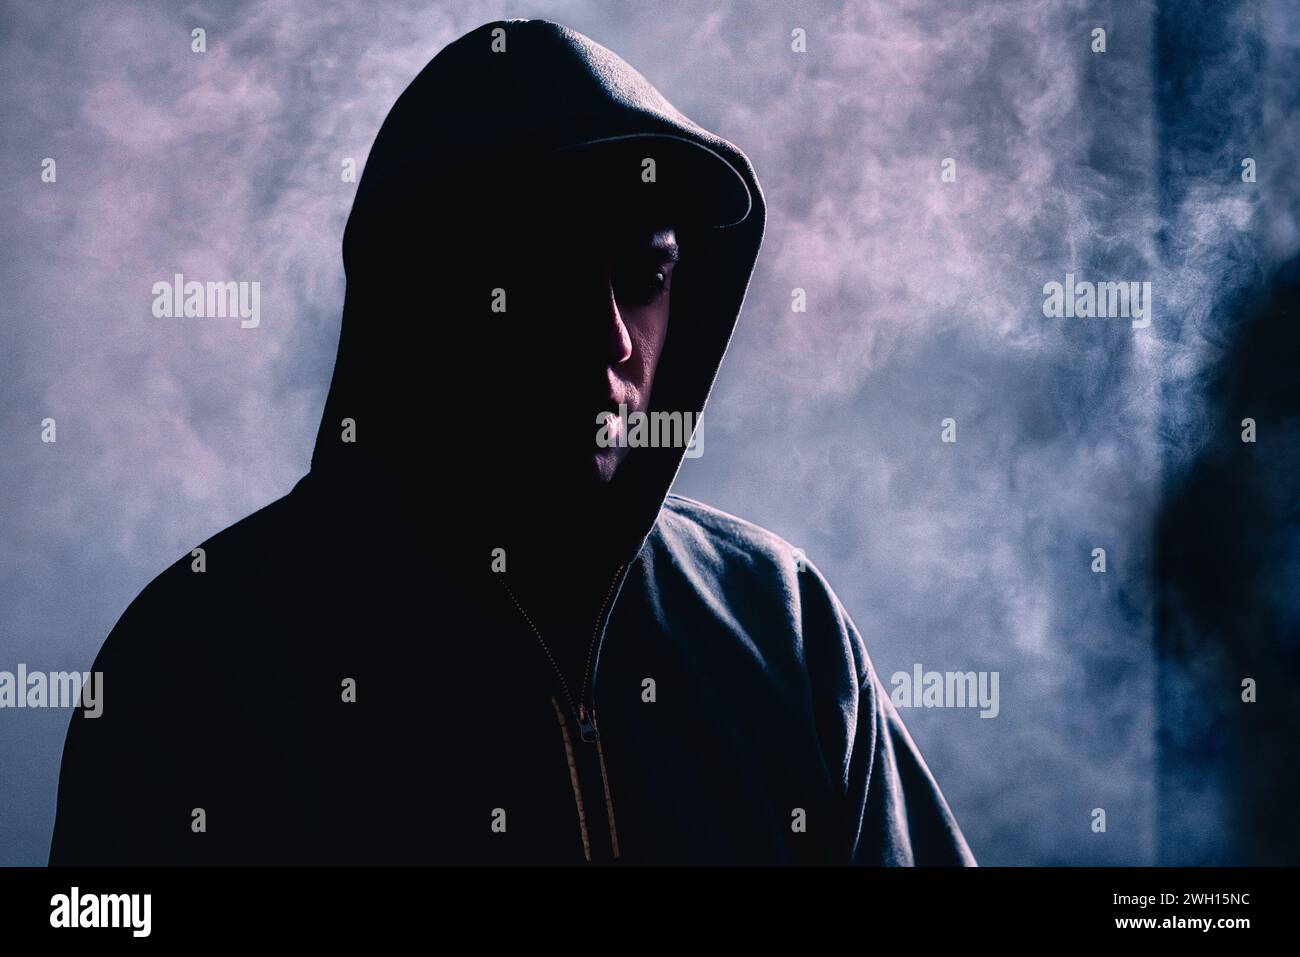 Criminal man in shadow. Scary suspicious stranger with hidden face. Silhouette of gangster with dark smoke fog background. Gang crime or horror. Stock Photo